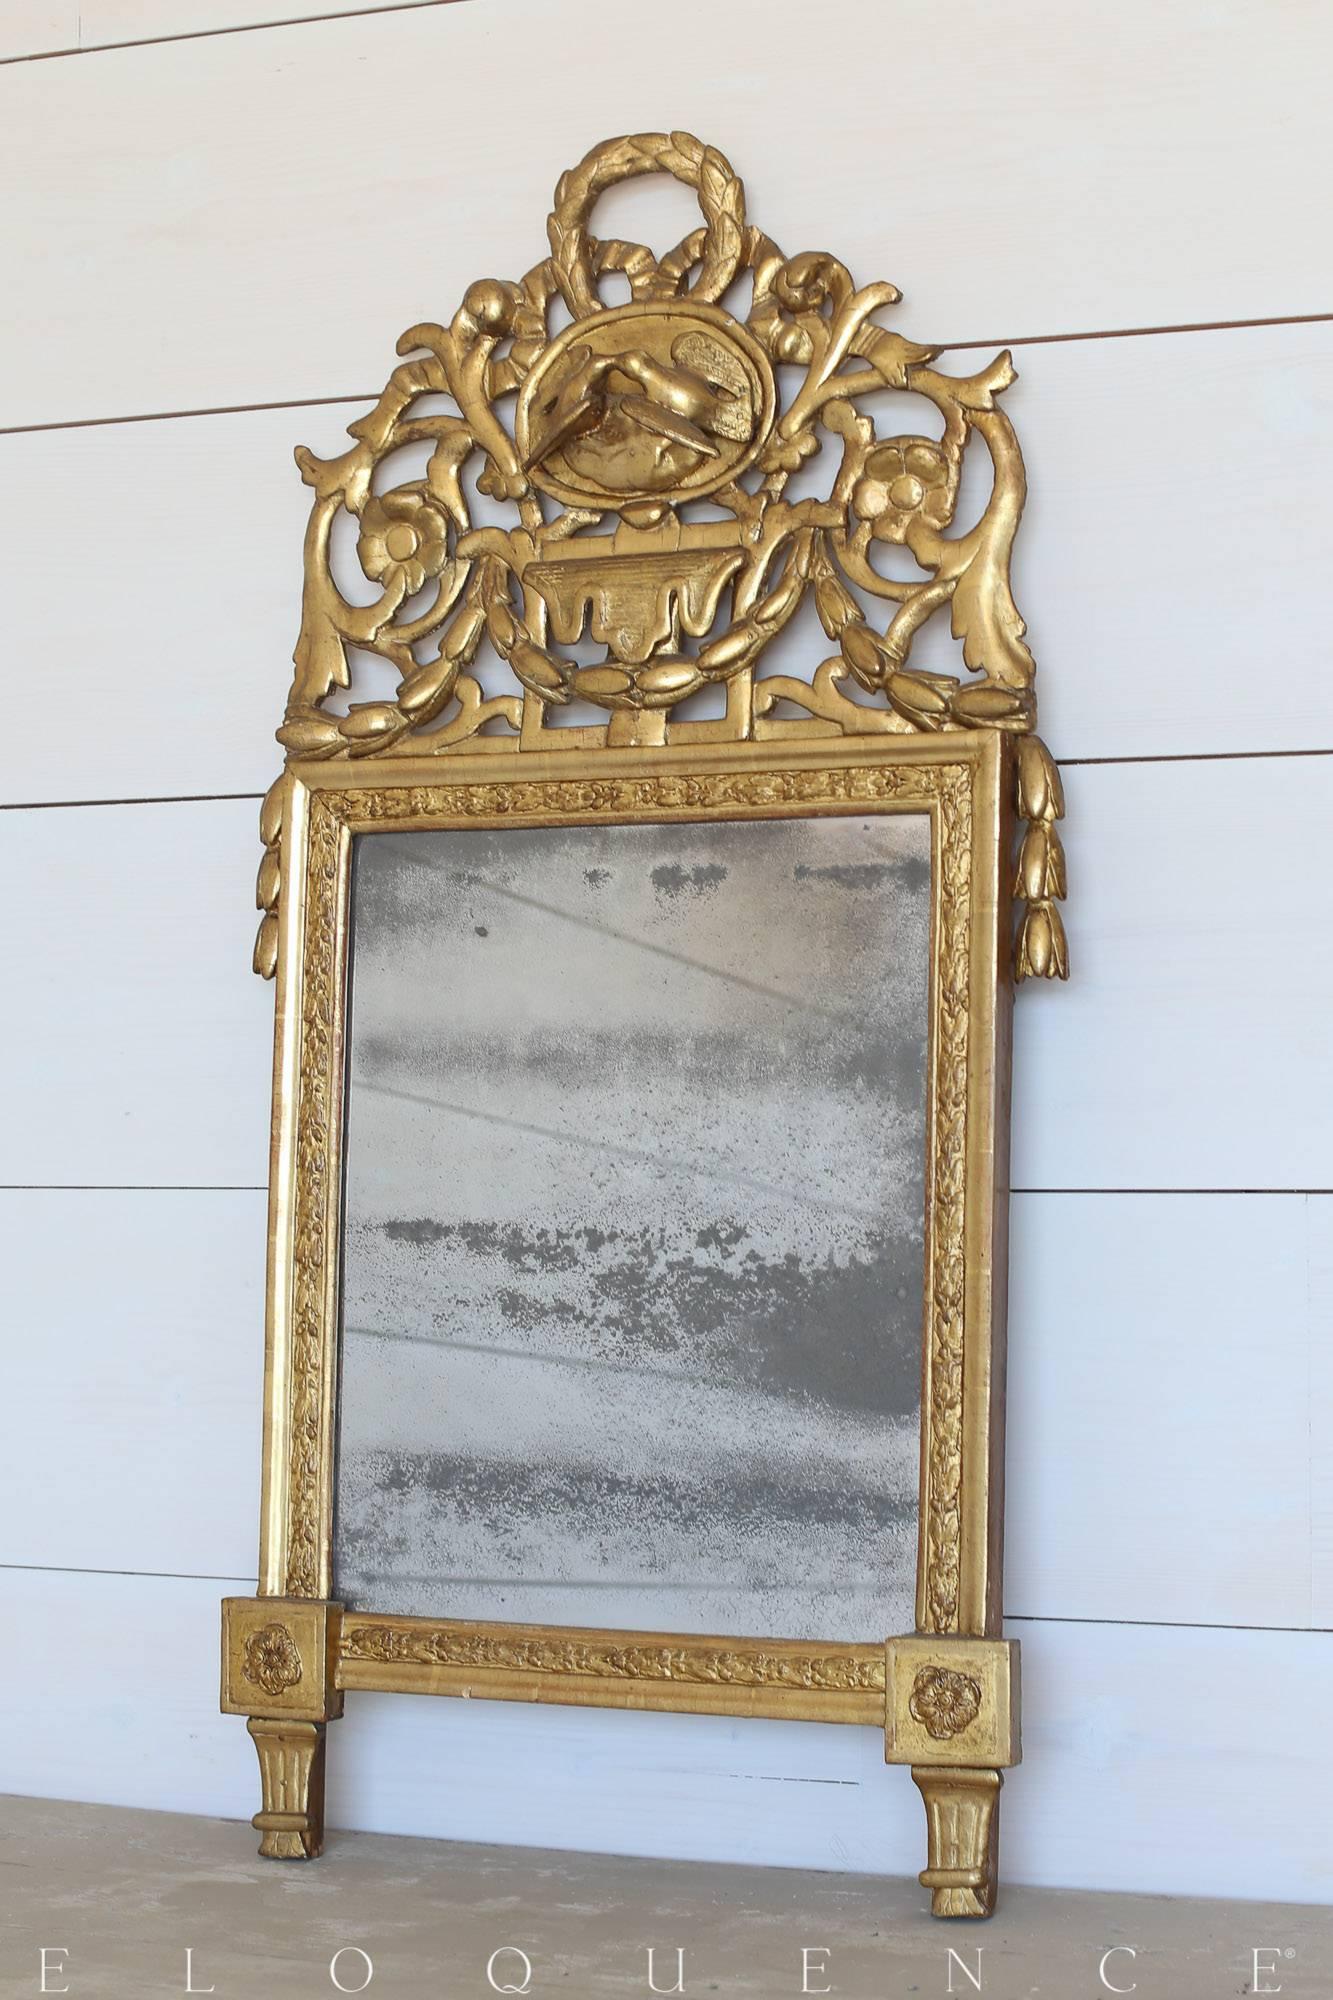 A petite wreath, sweet kissing birds and a floral motif decorate the crest of this antique mirror. The lightly distressed gilt finish and original mercury glass truly add to the aged elegance of this piece.